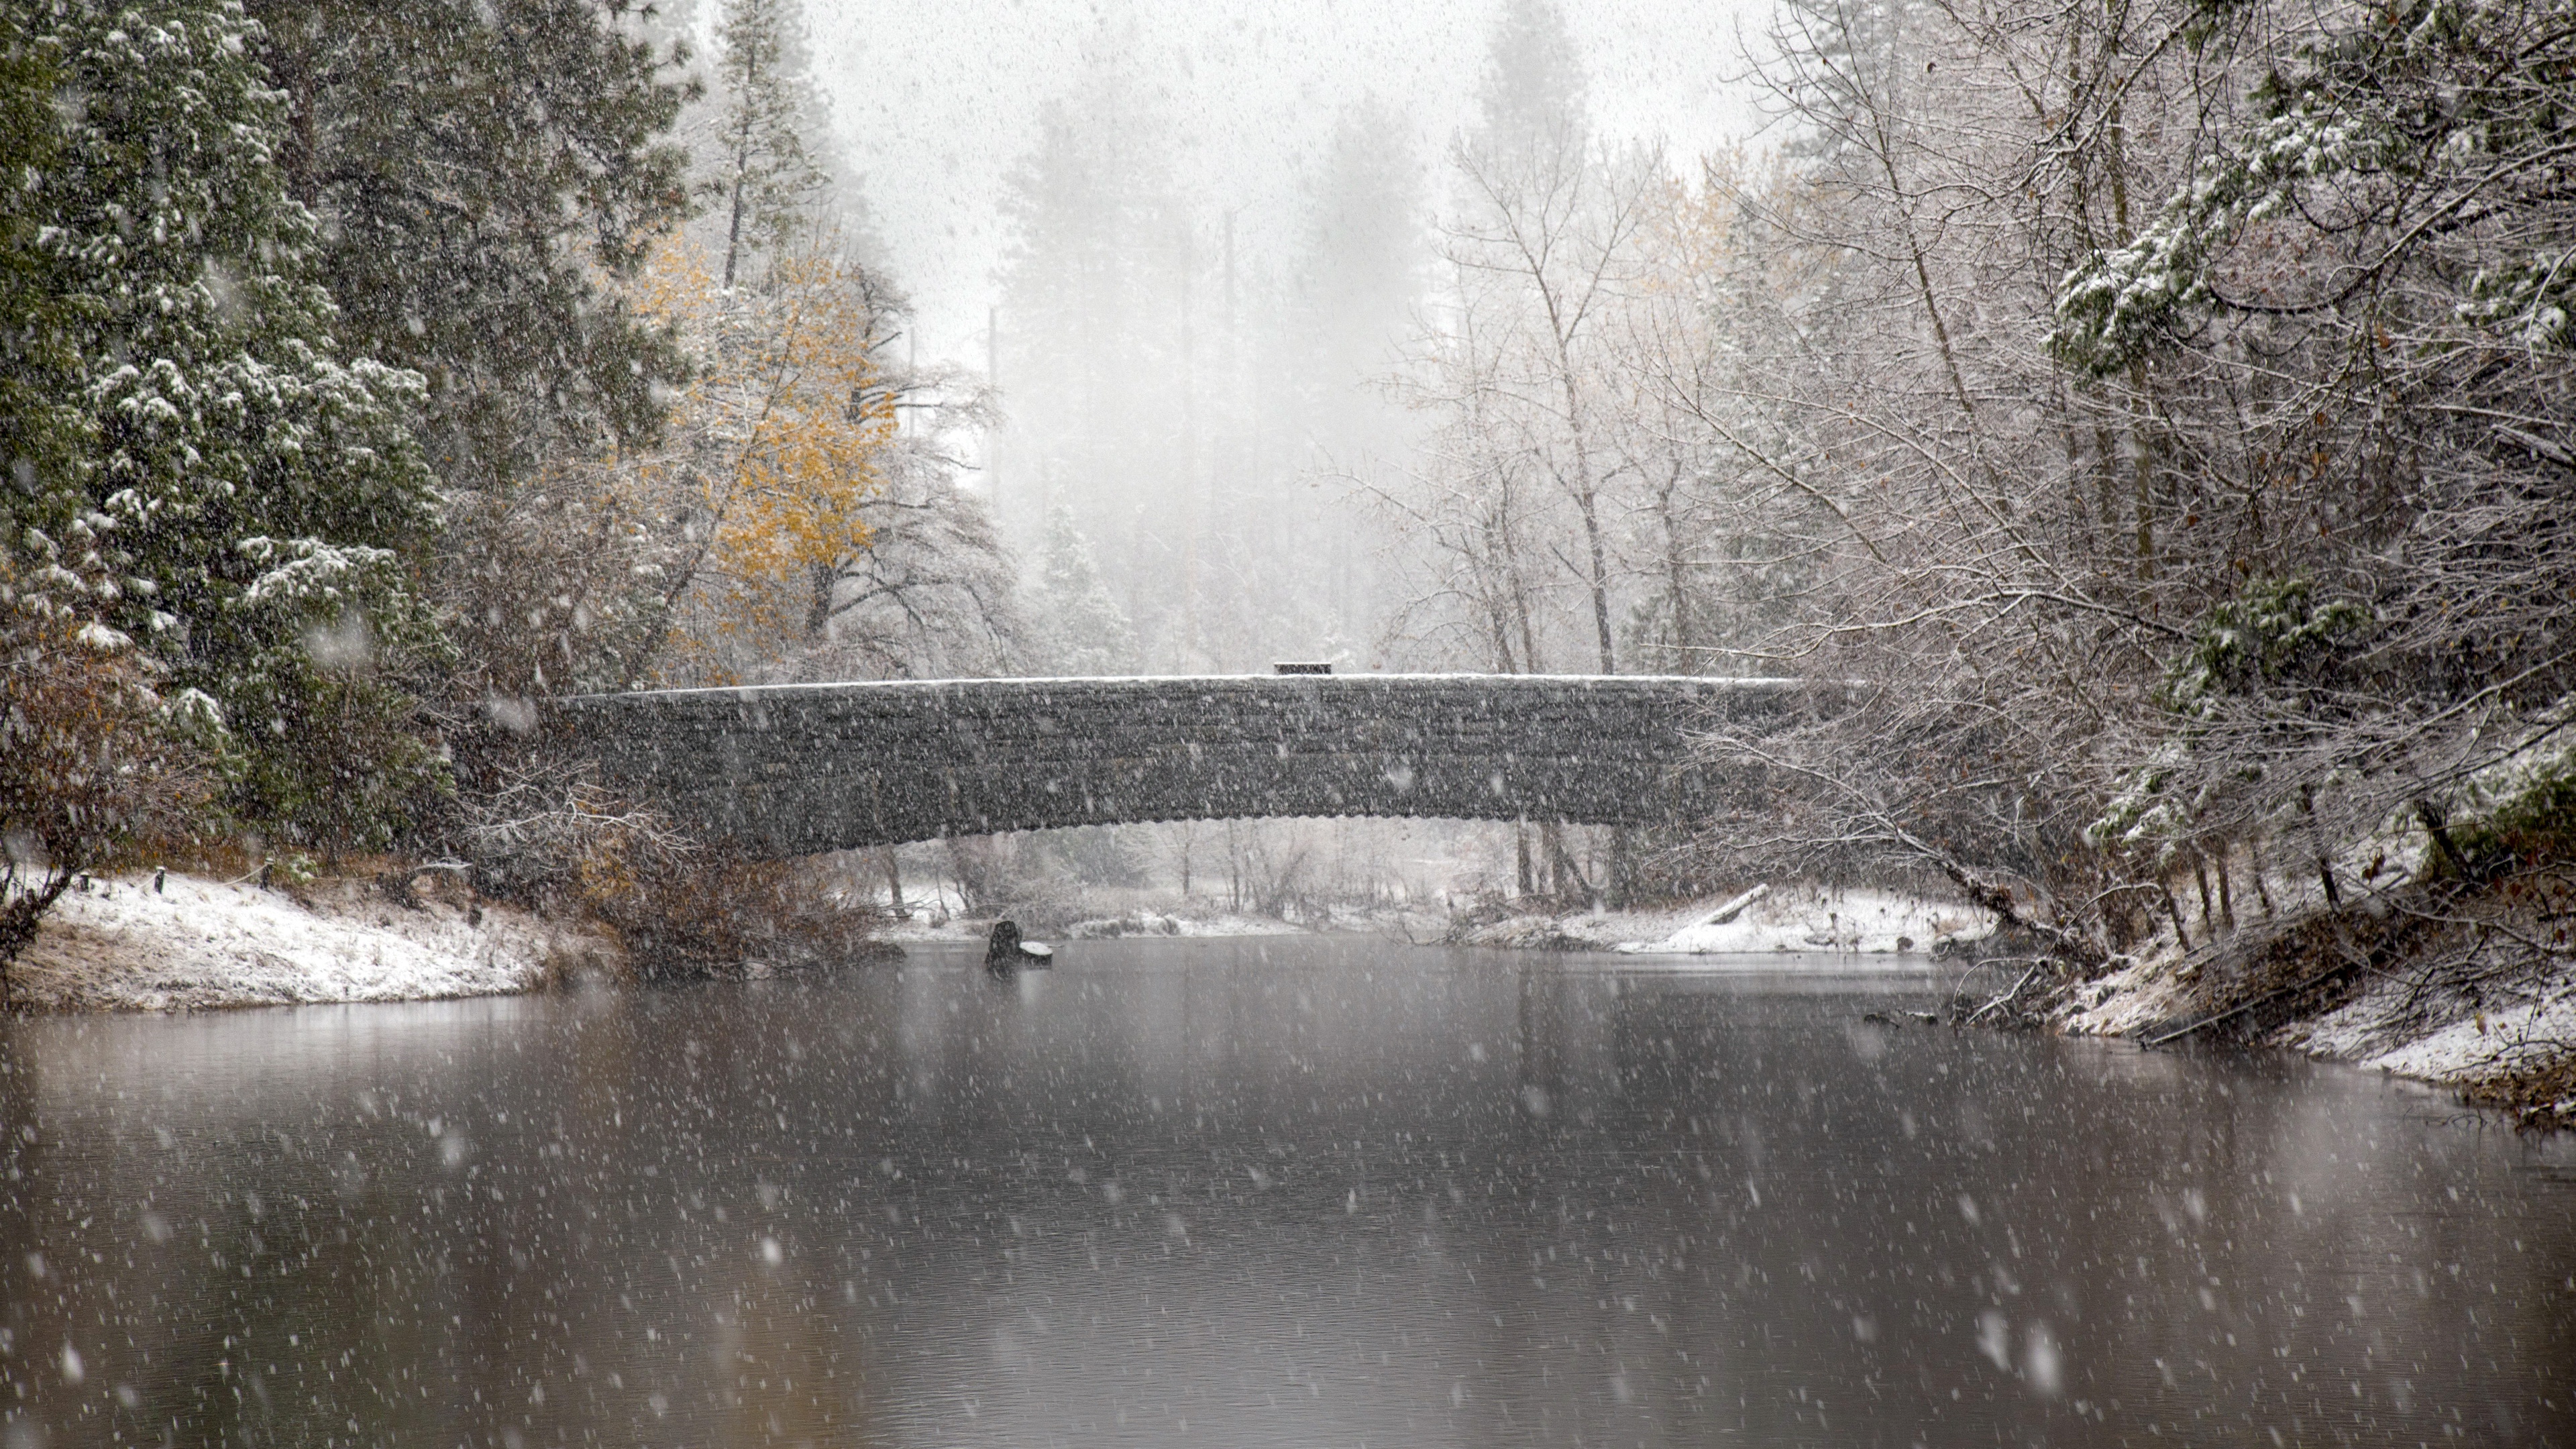 General 3840x2160 water nature winter outdoors snow cold trees USA bridge